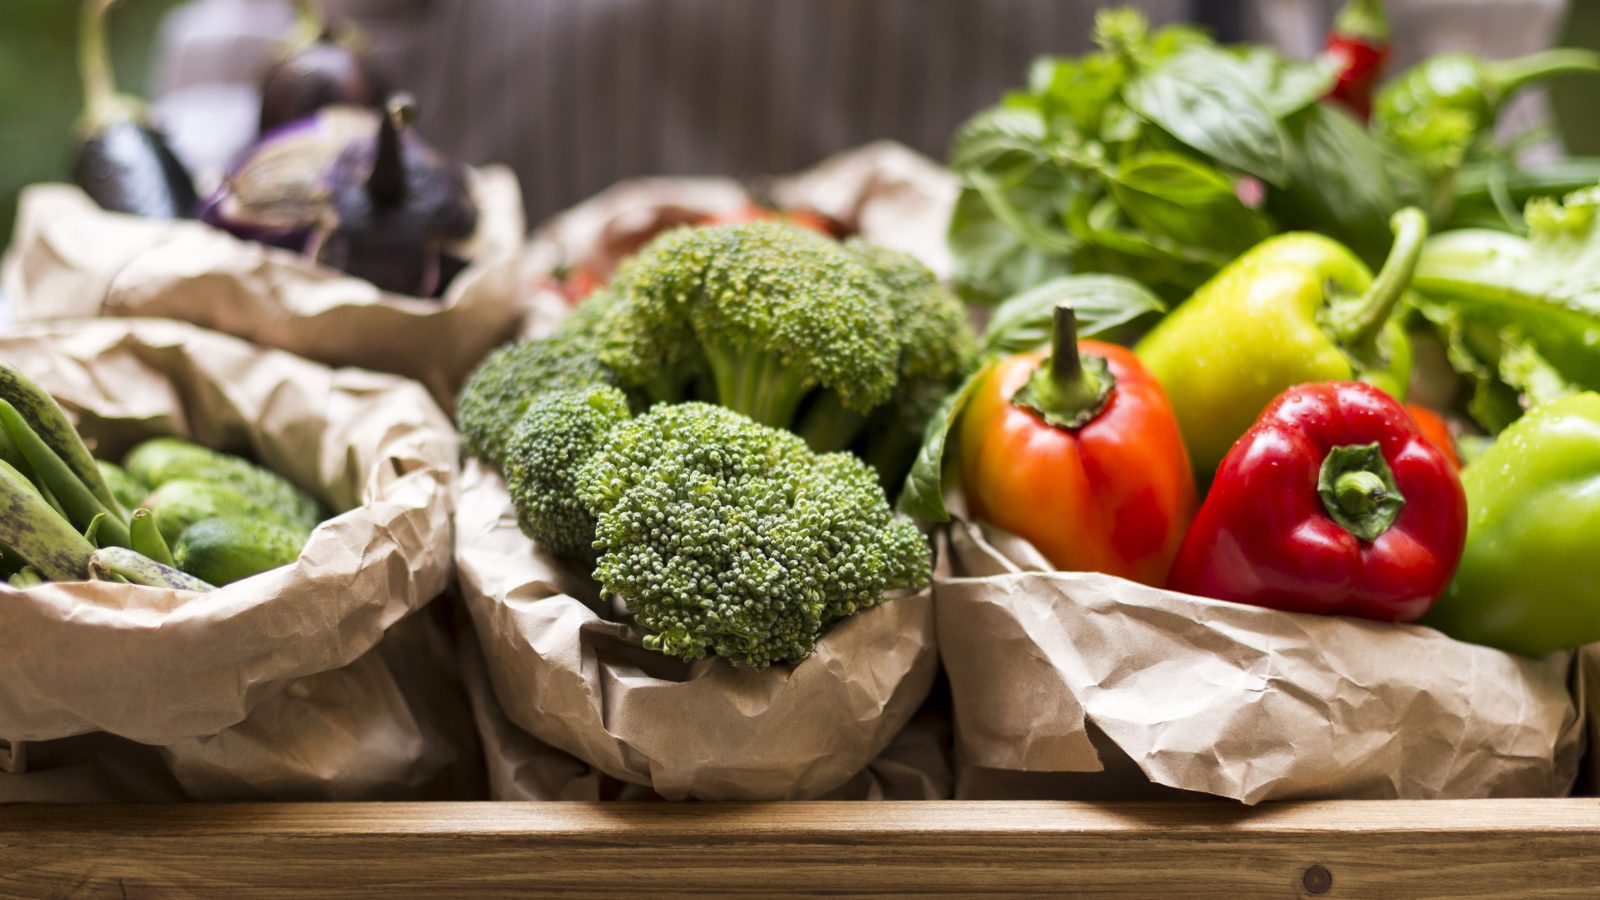 Fresh broccoli, peppers and other vegetables are displayed in paper bags on a wooden table.